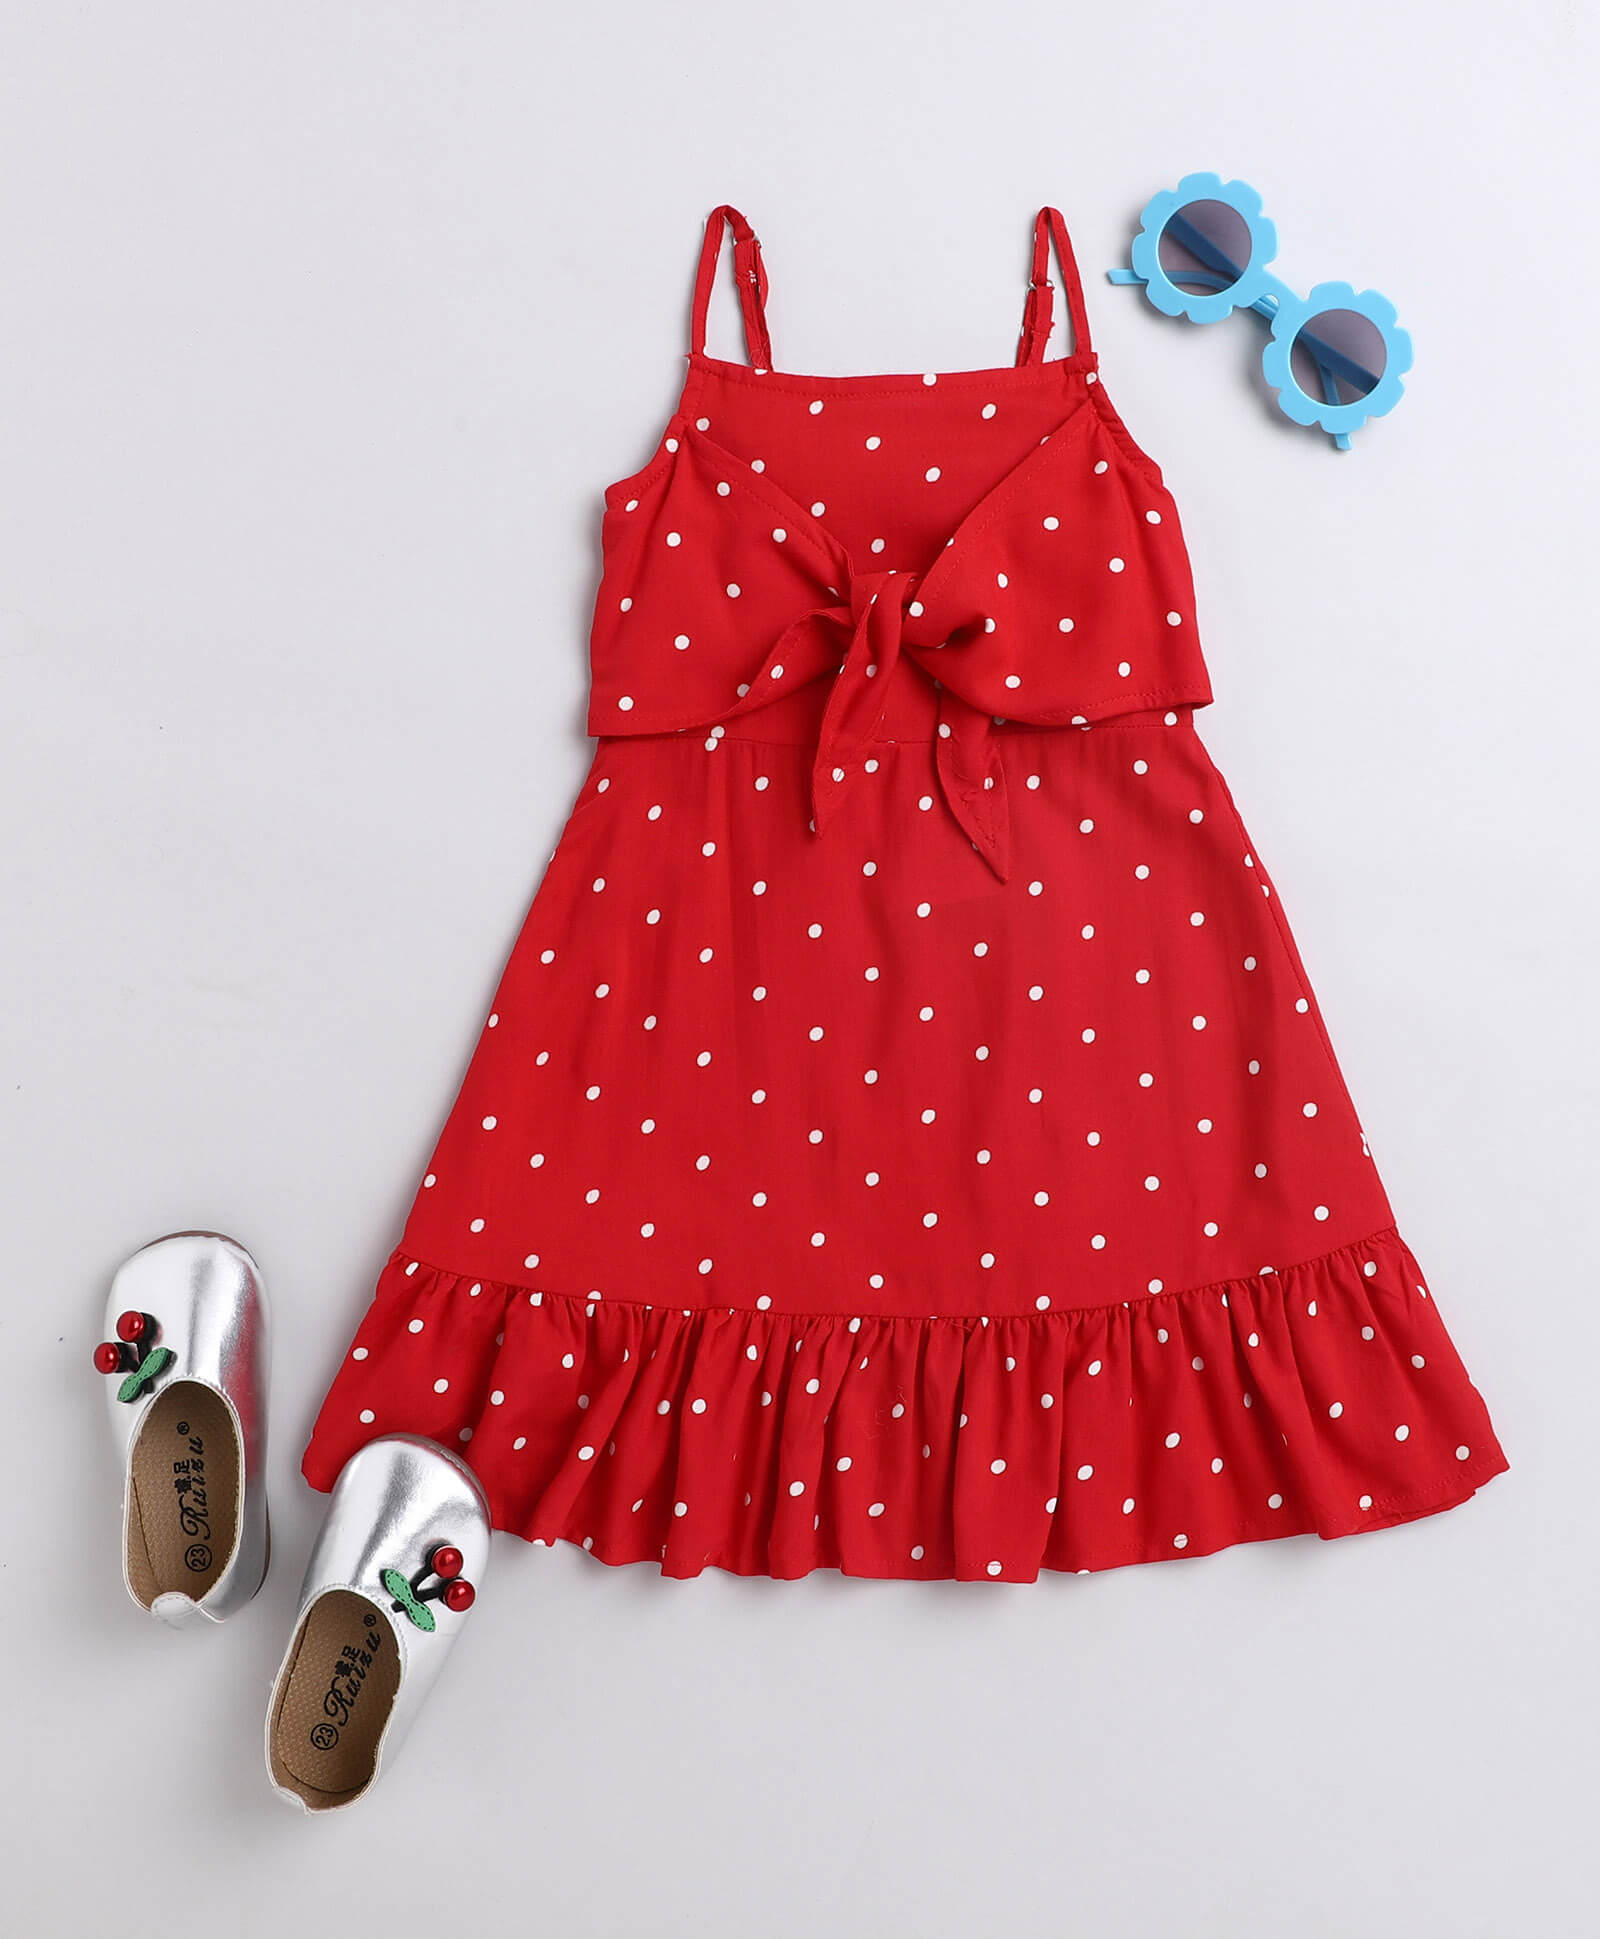 Taffykids red Sleeveless Front Tie Up Polka Dots Printed Dress - Red